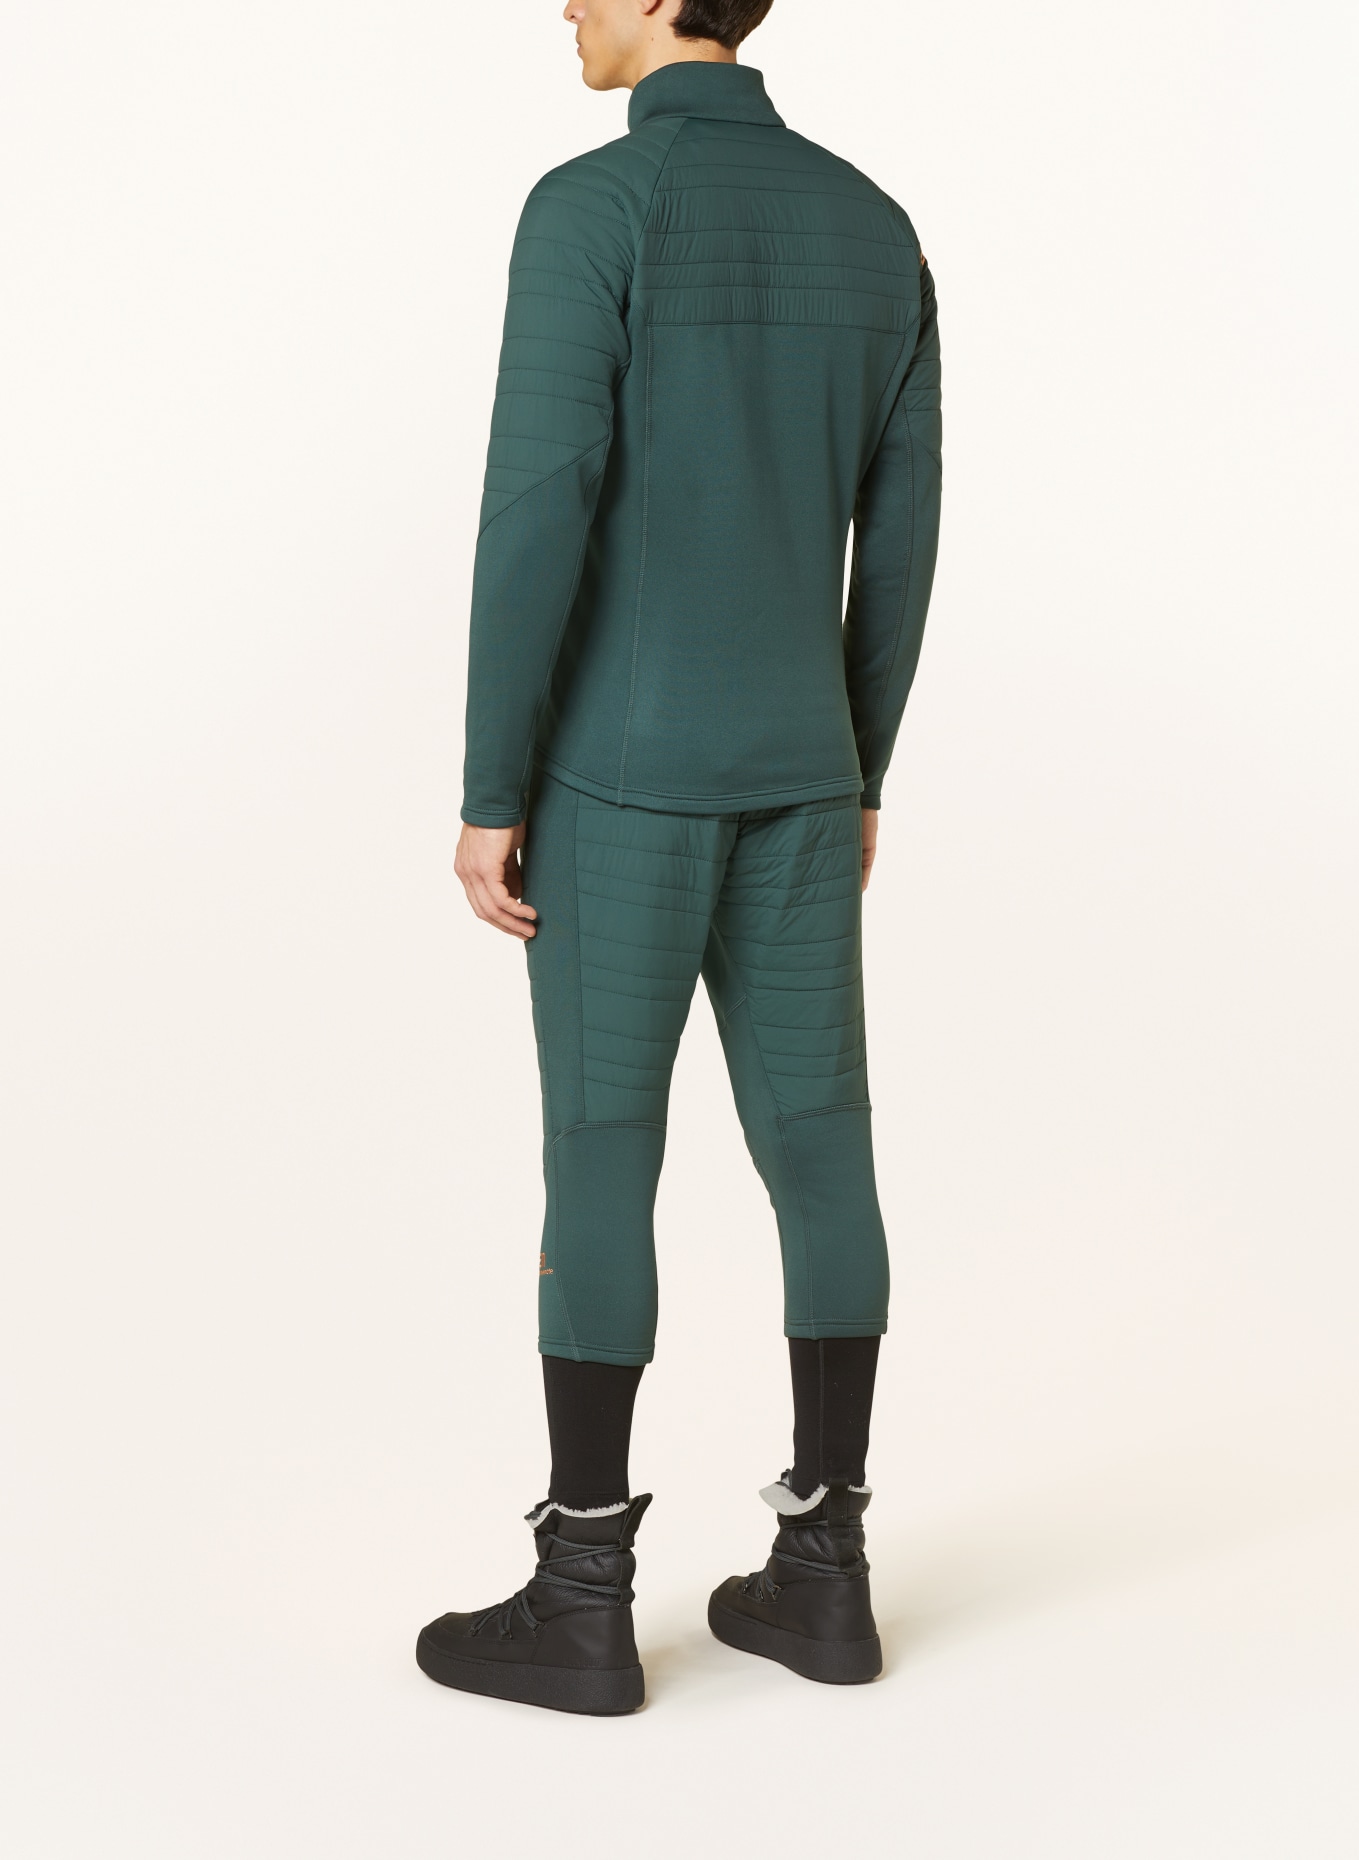 state of elevenate Mid-layer jacket FUSION STRETCH, Color: DARK GREEN (Image 3)